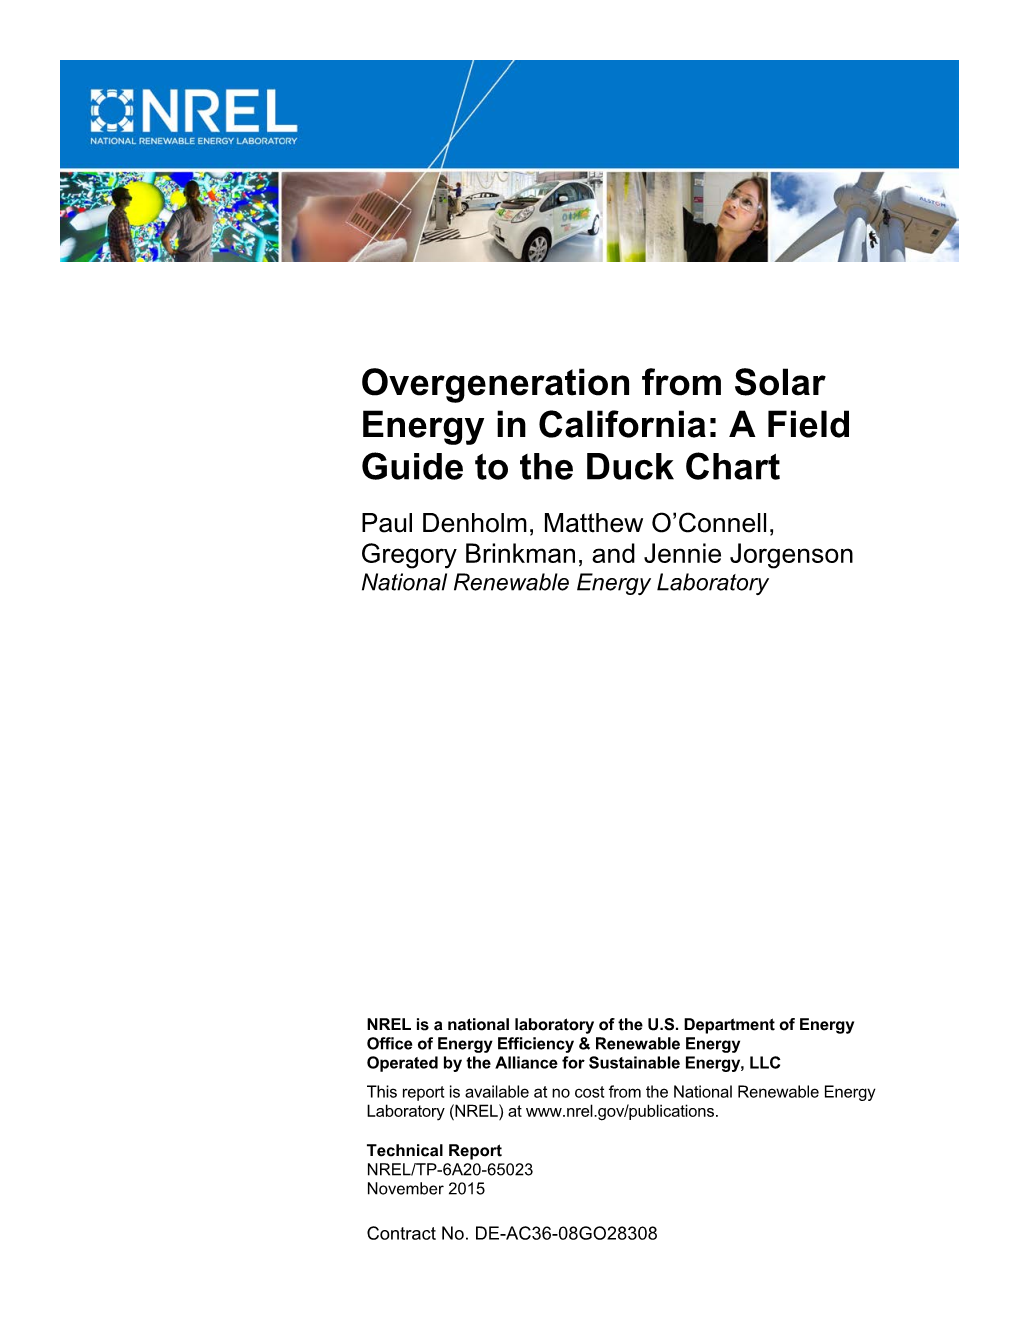 Overgeneration from Solar Energy in California: a Field Guide To